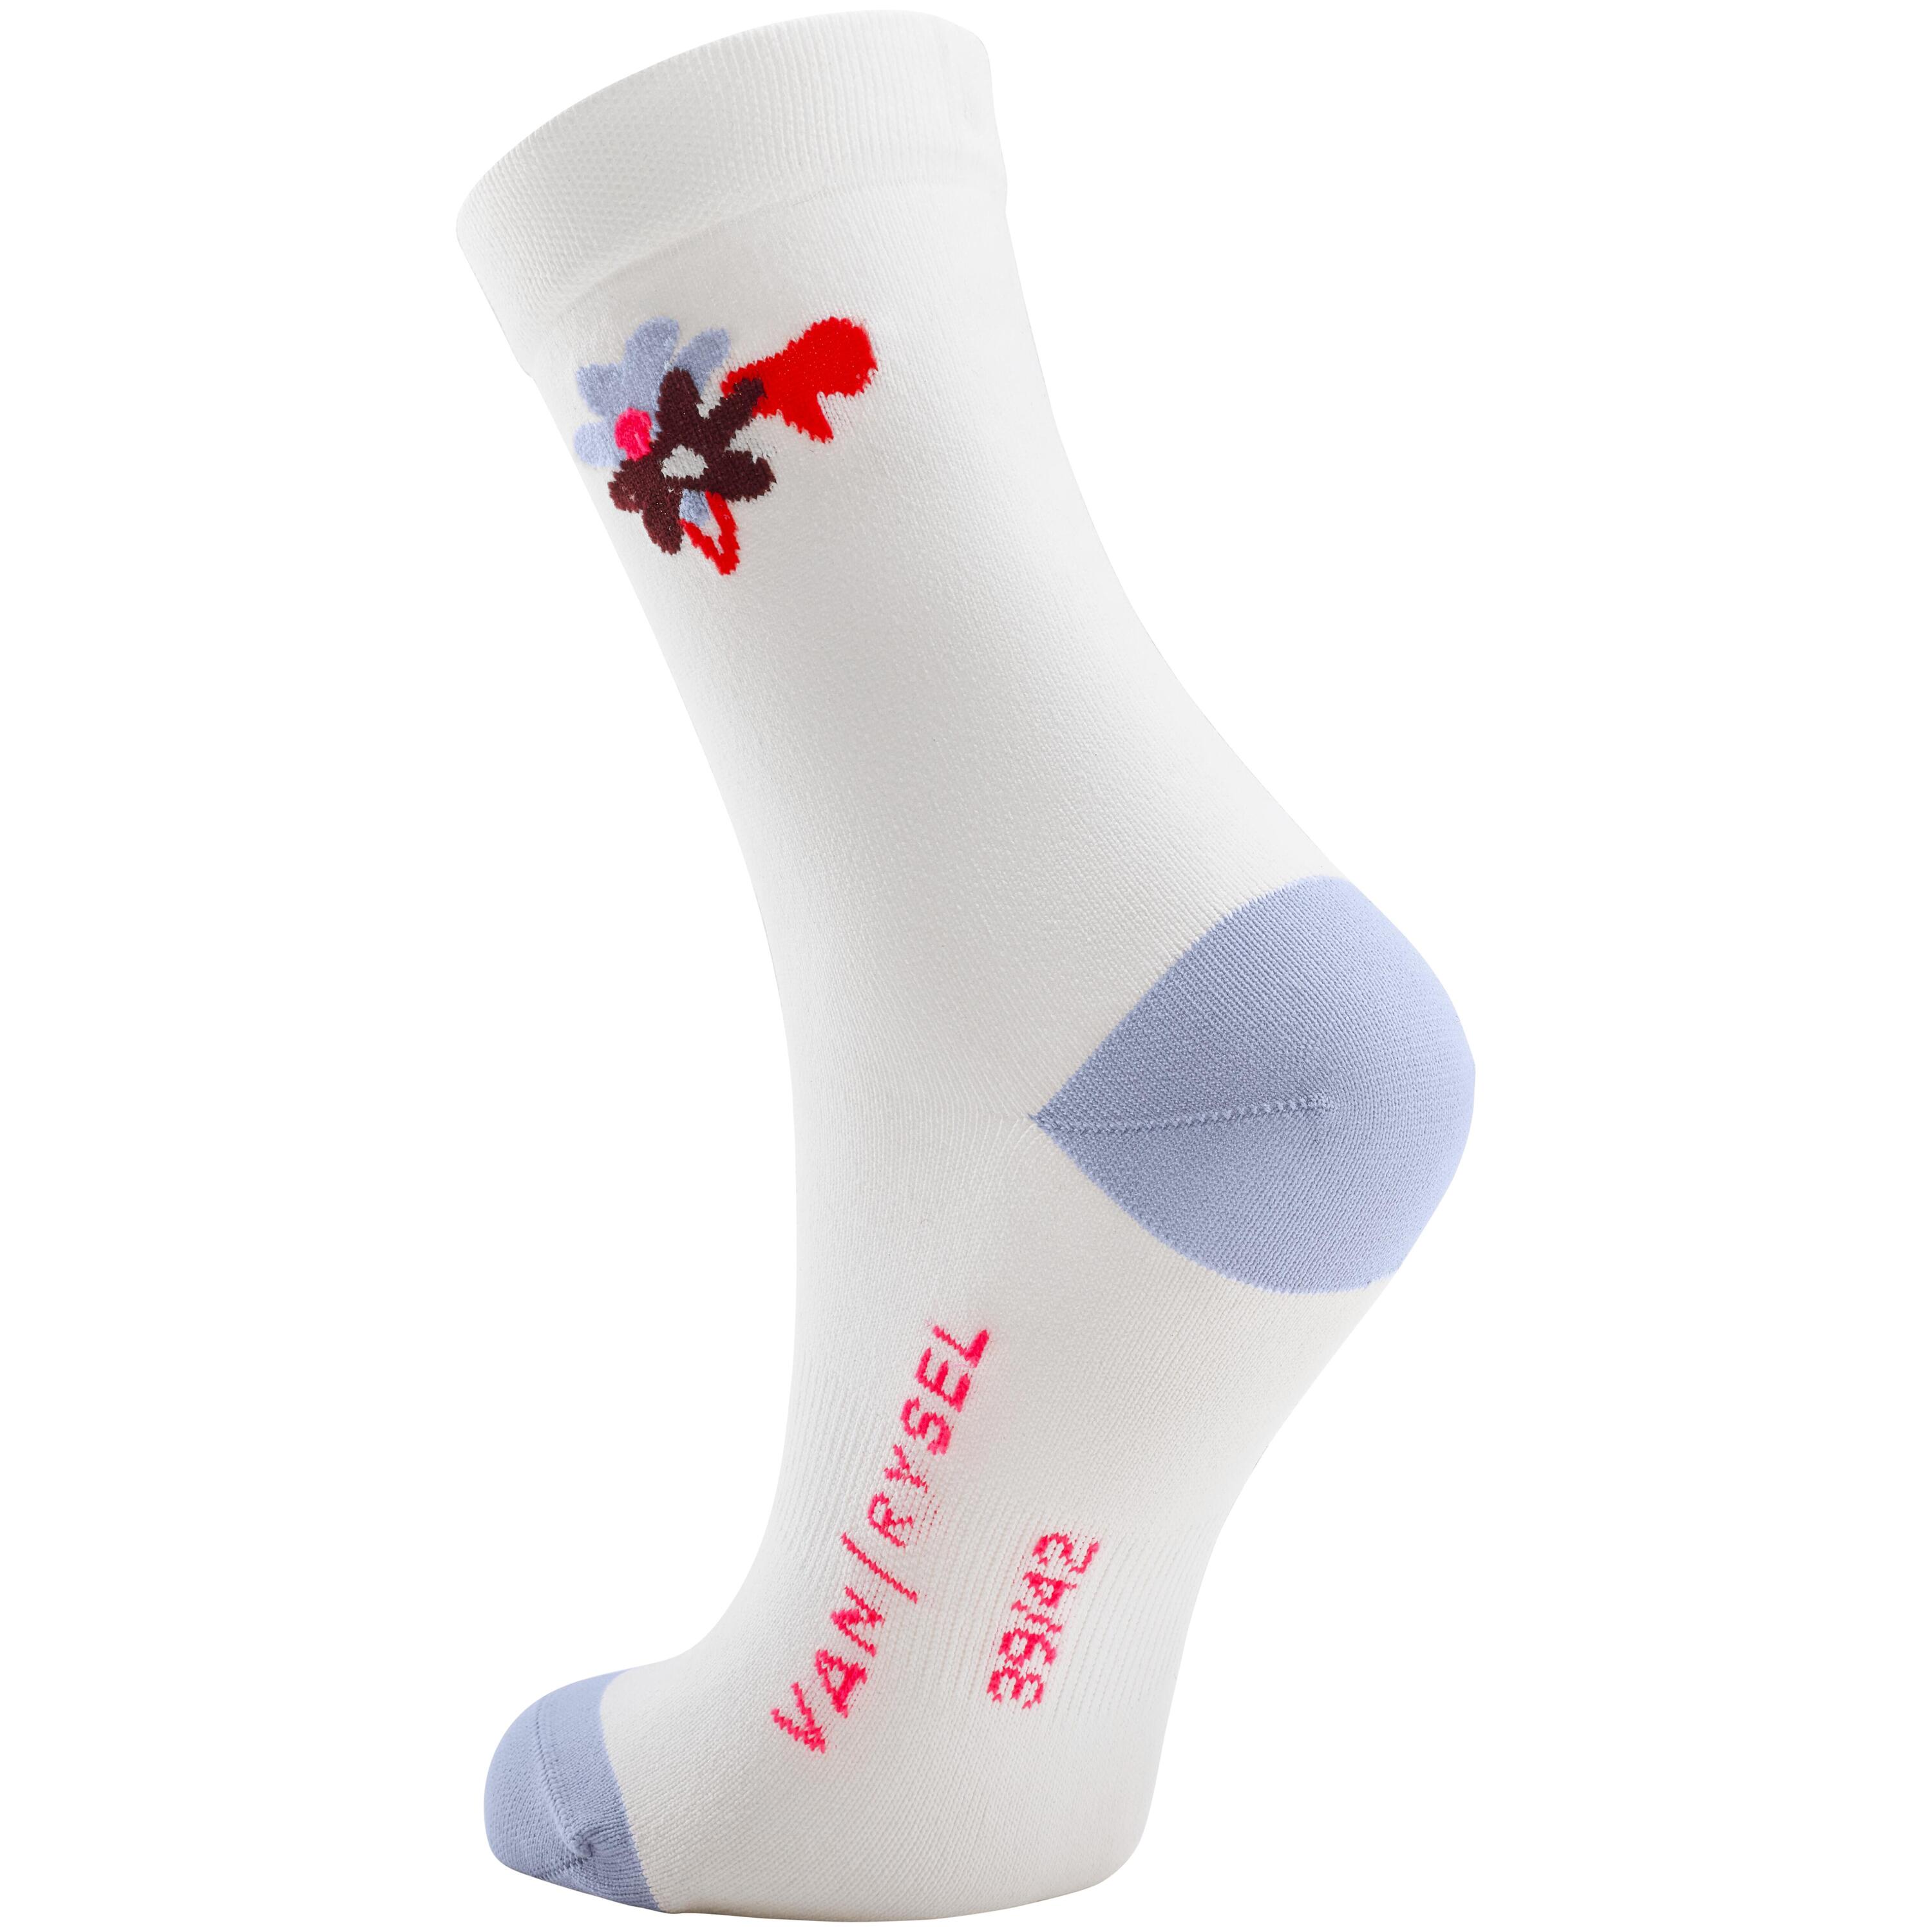 Cycling Socks RoadR 500 - White and Lavender  2/3